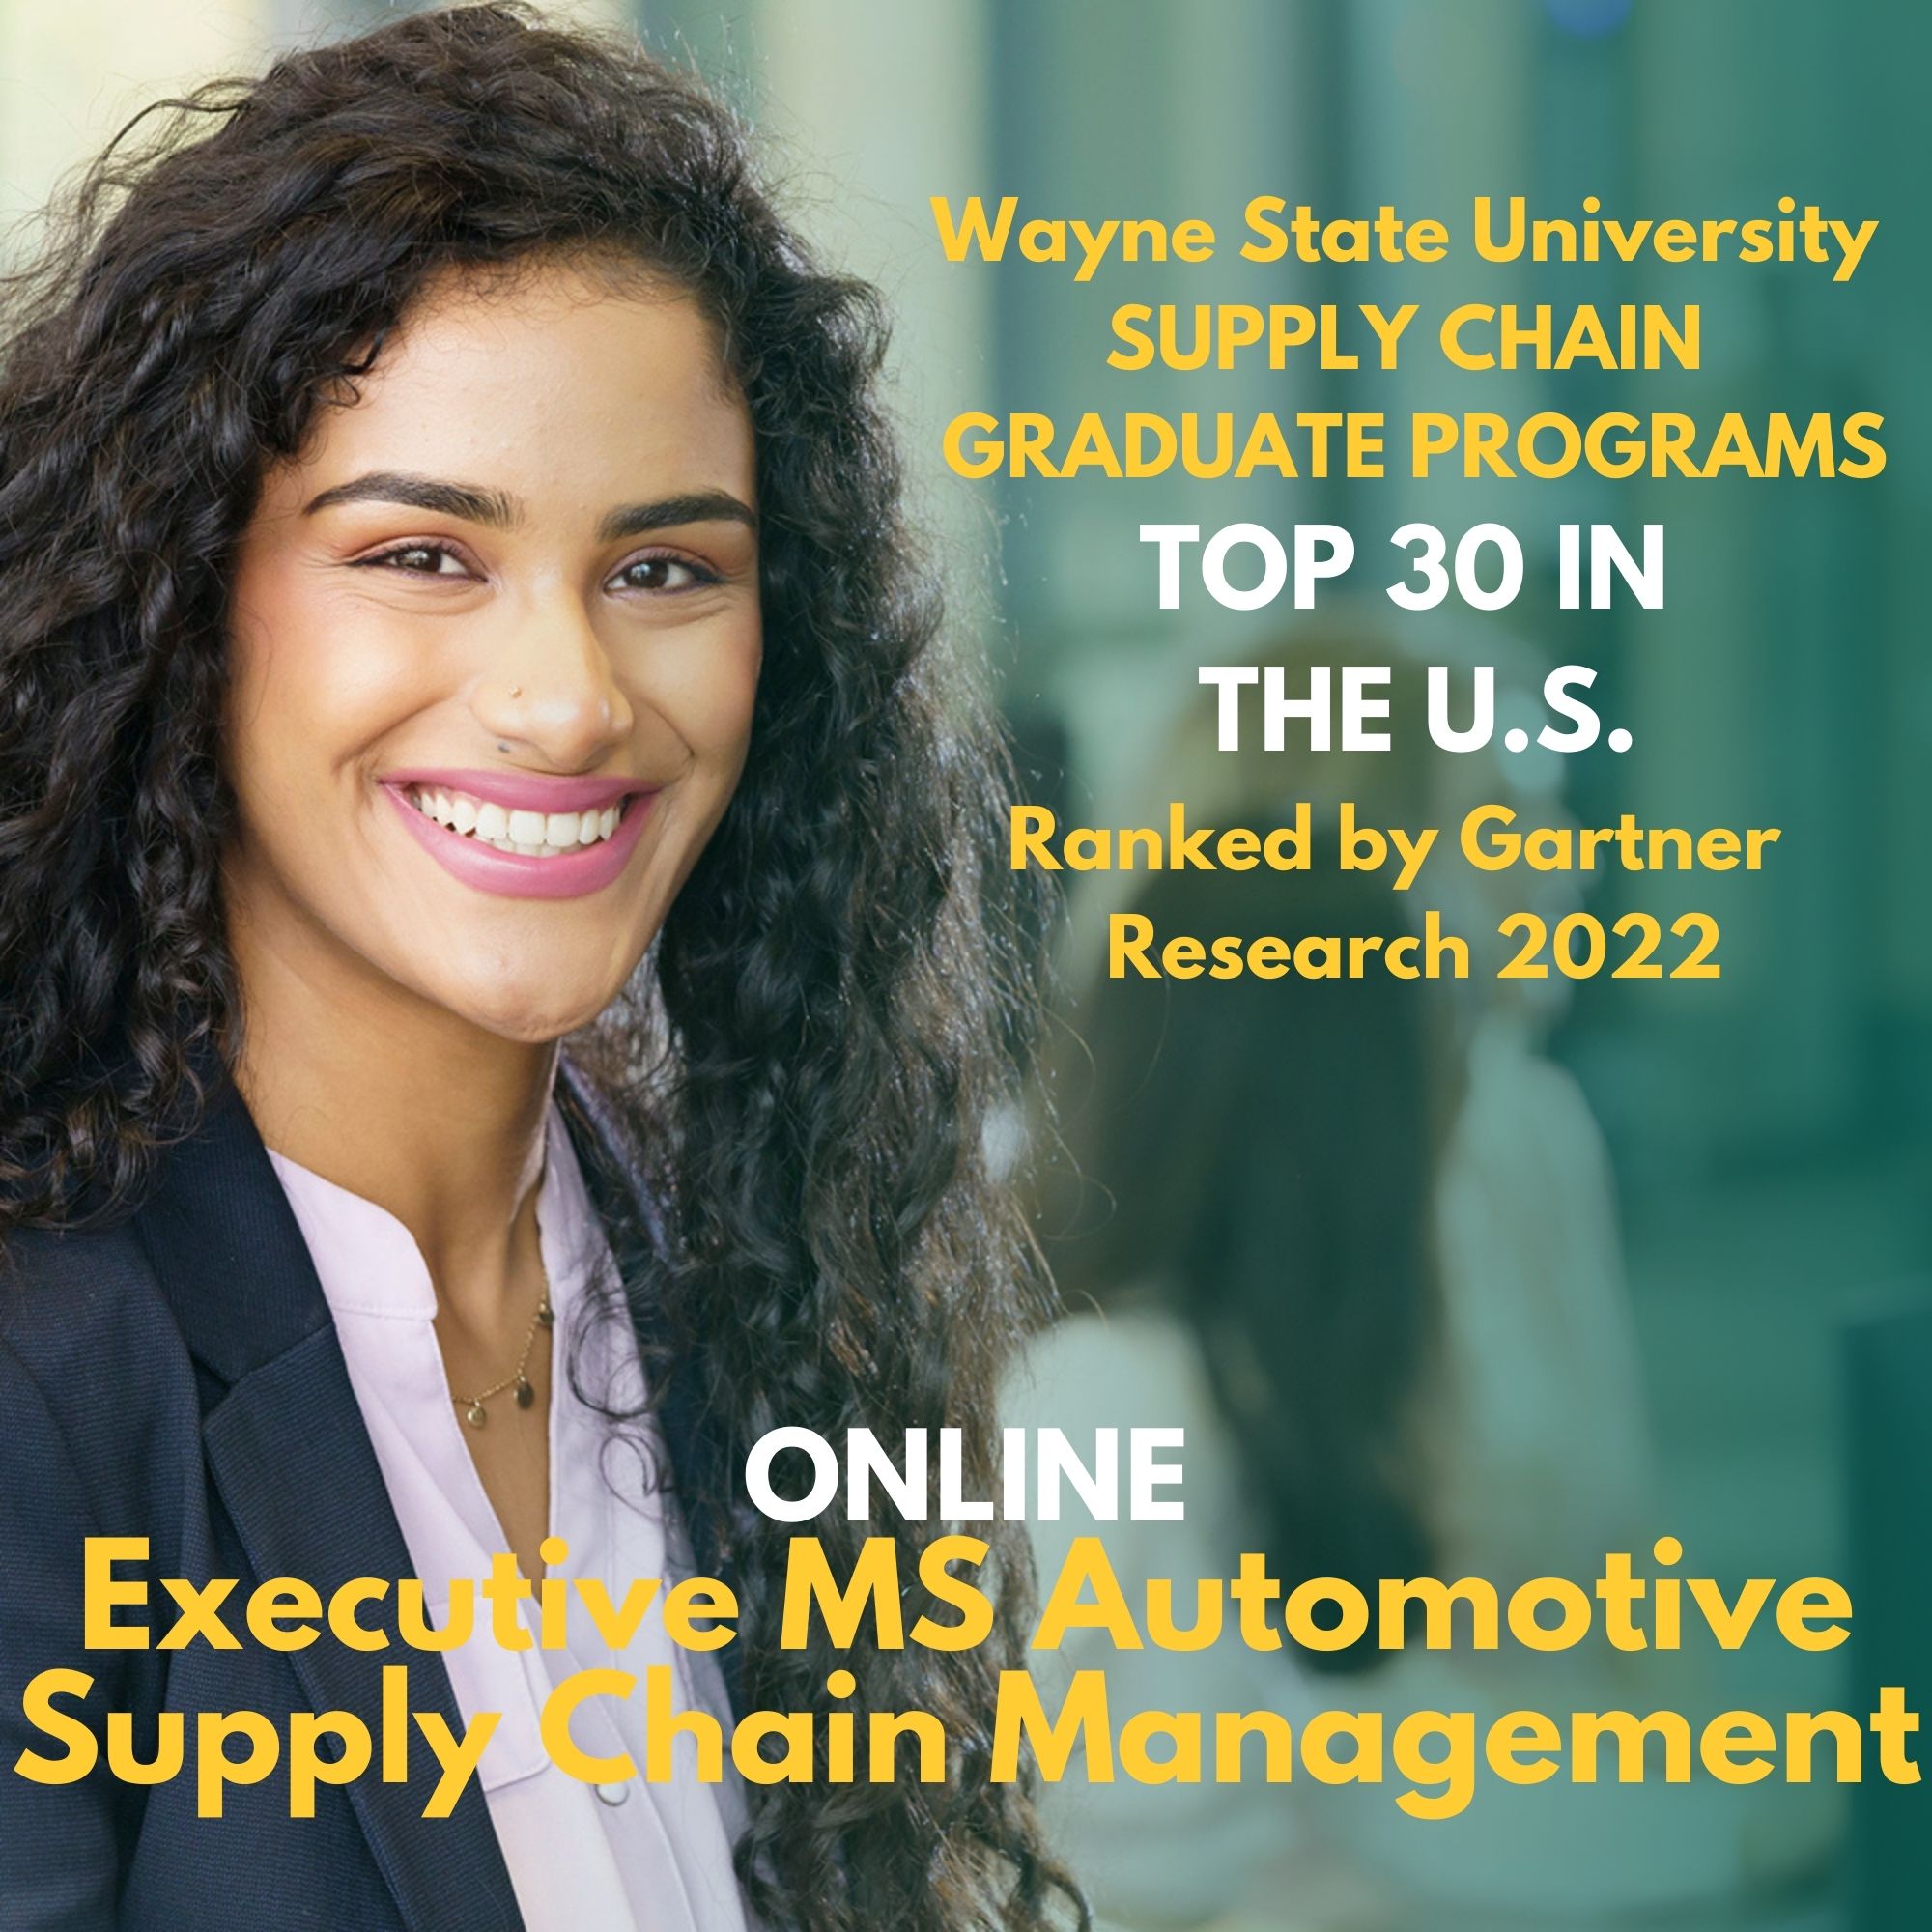 Learn about complex manufacturing supply chains with an emphasis on global issues from expert faculty and industry leaders.